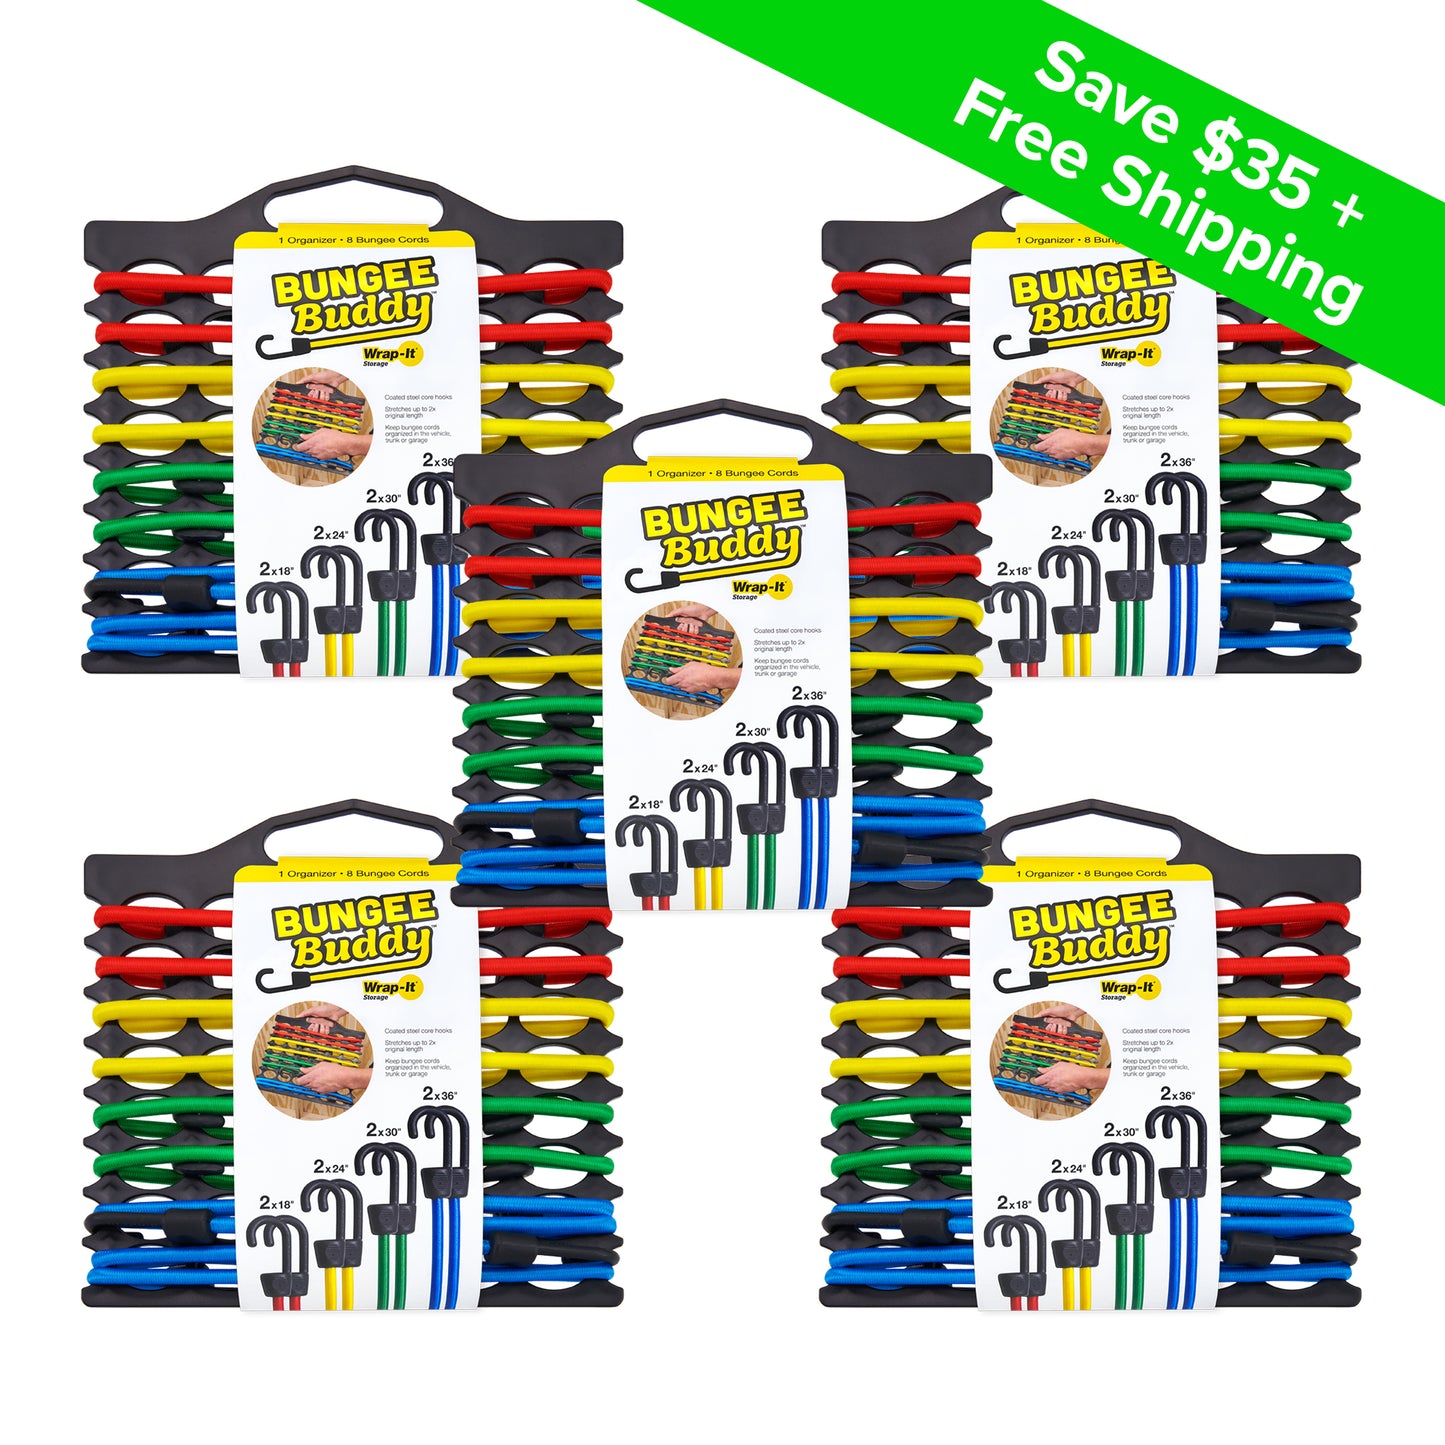 Bungee Buddy™ - Bungee Cord Organizer + 8 Bungee Cords (5-Pack)